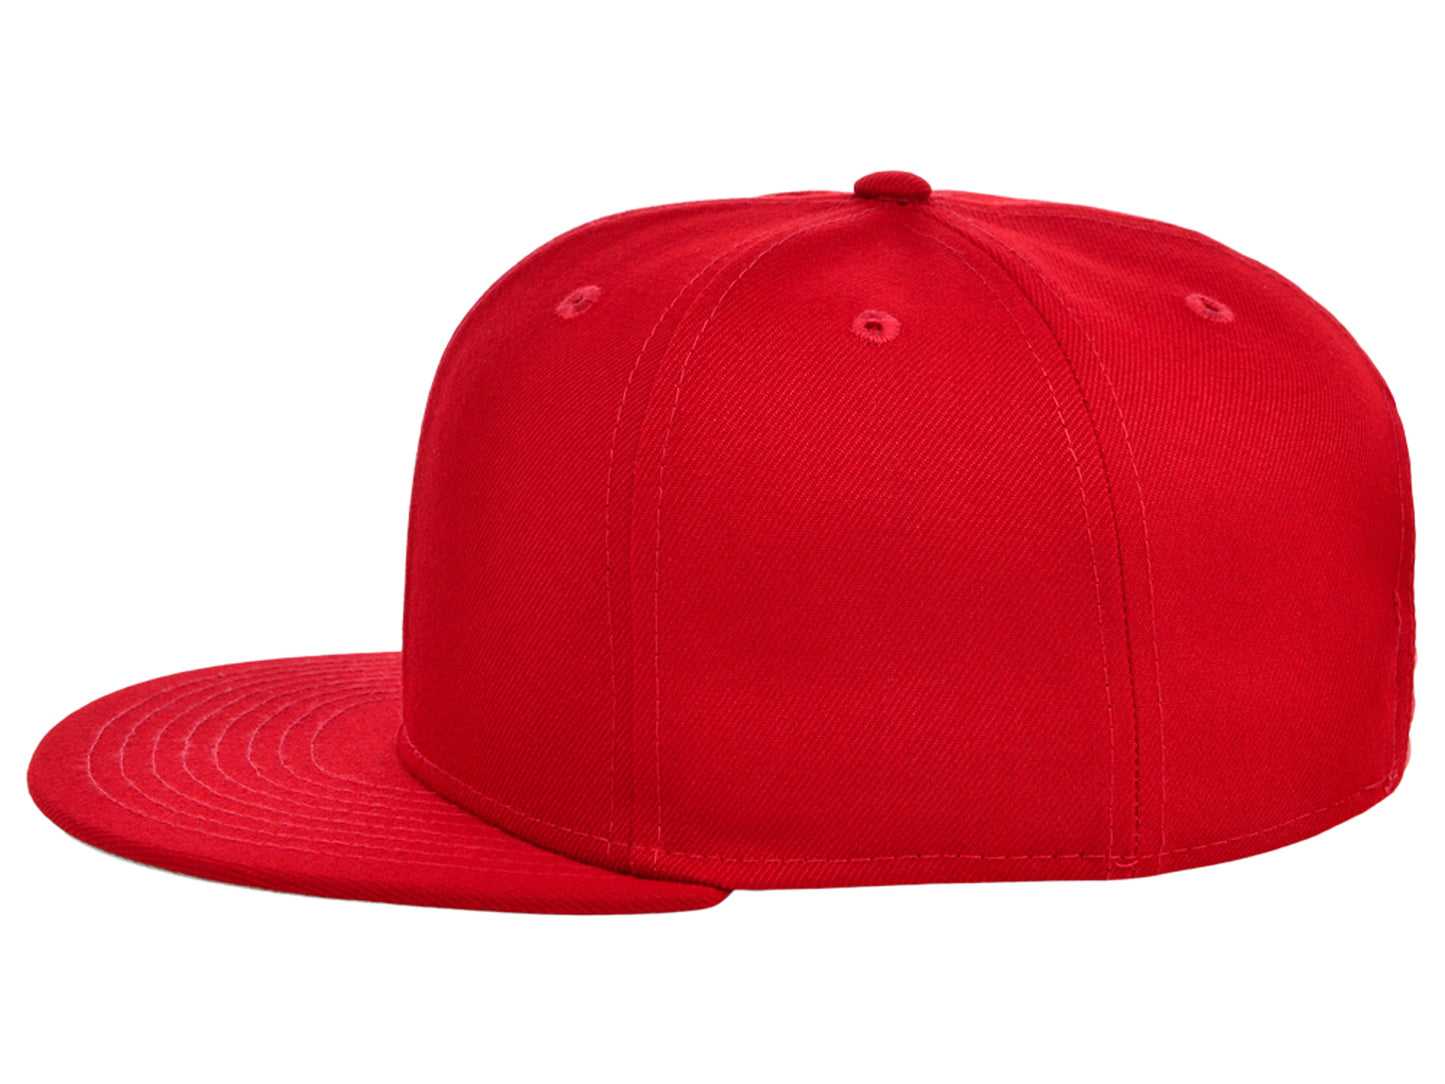 Crowns By Lids Dime Snapback Cap - Red